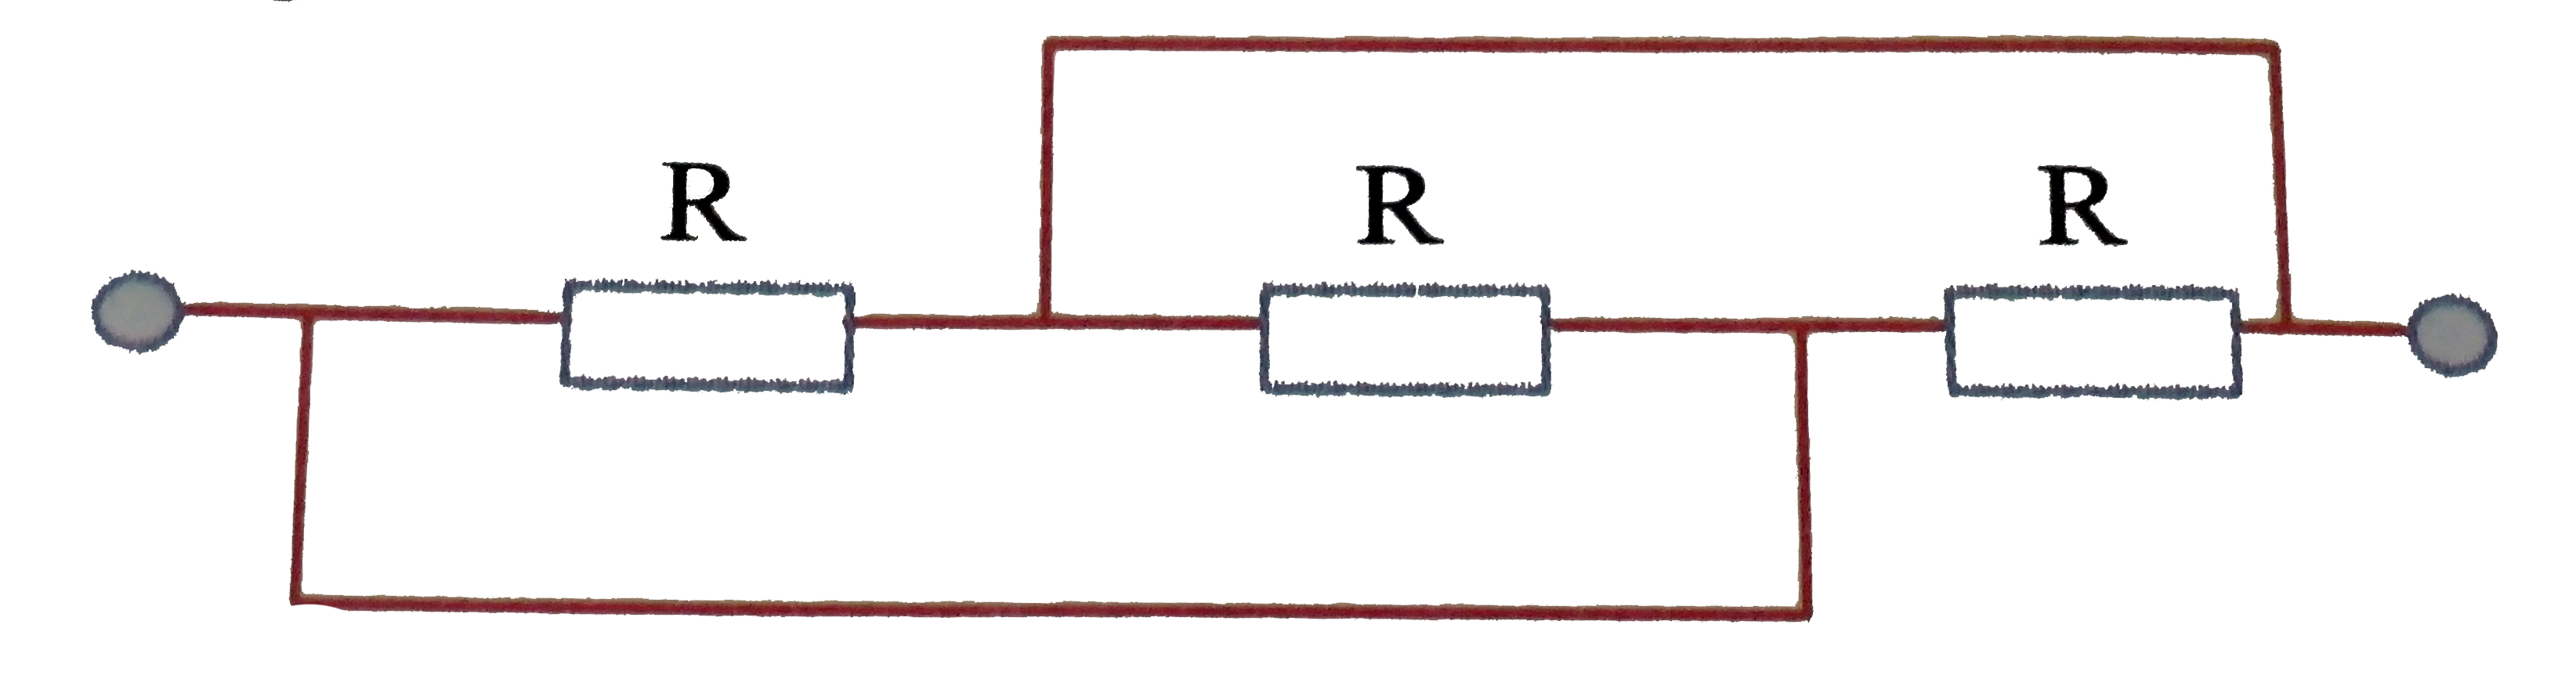 A dc source with internal resistance R(0) is loaded with three identical resistance R as shown in the figure. At what value of R will the thermal power generated in this circuit be the highest?